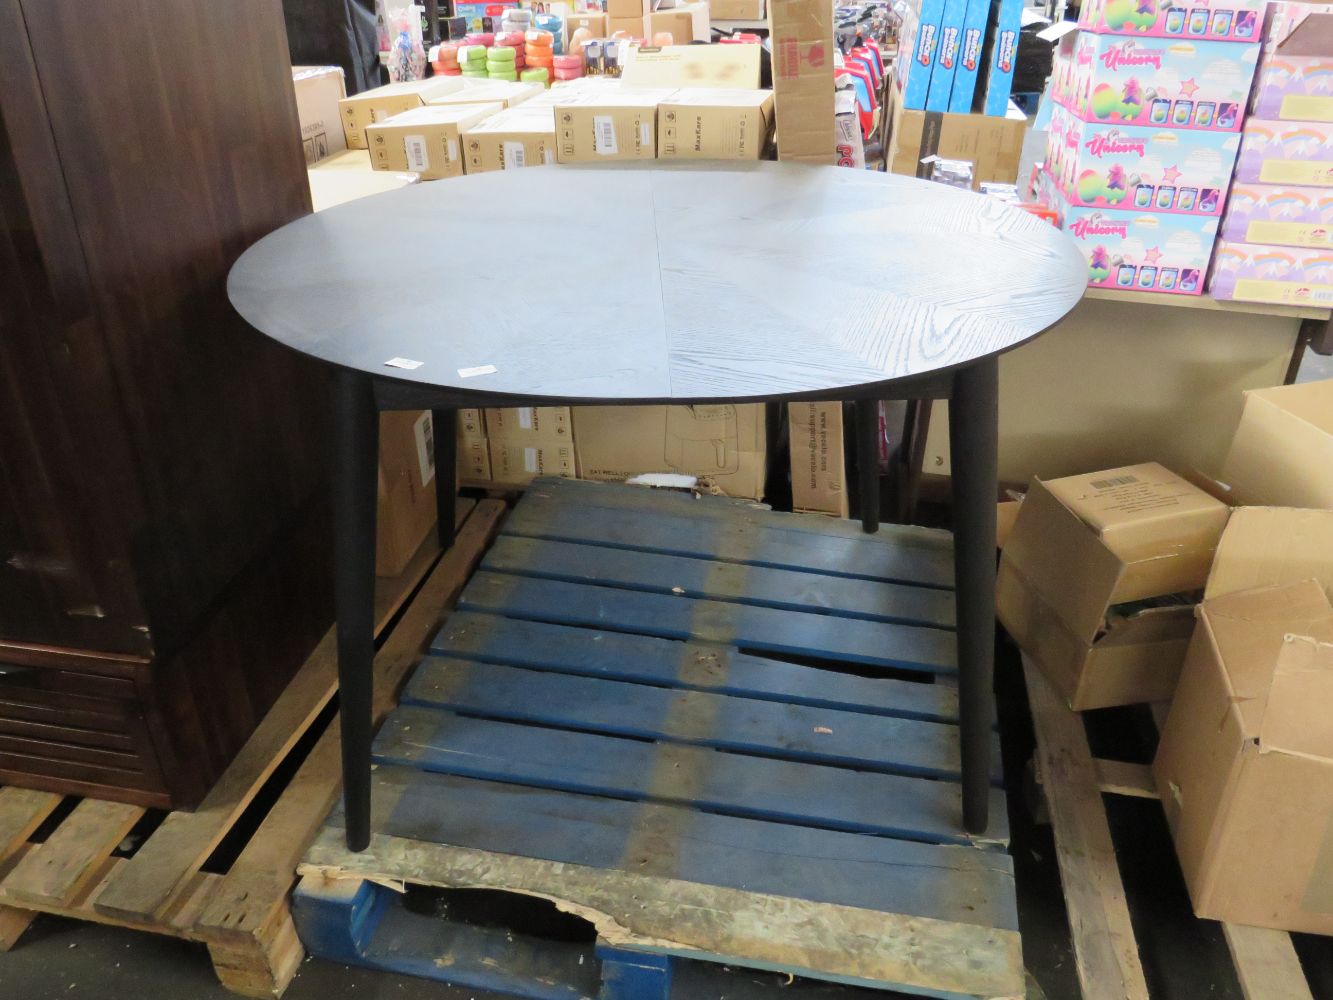 Thursdays Furniture Auction At Low Prices, Containing Tables & Chairs, Coffee Tables, Lamps, And More From The Worlds Biggest Furniture Outlets!